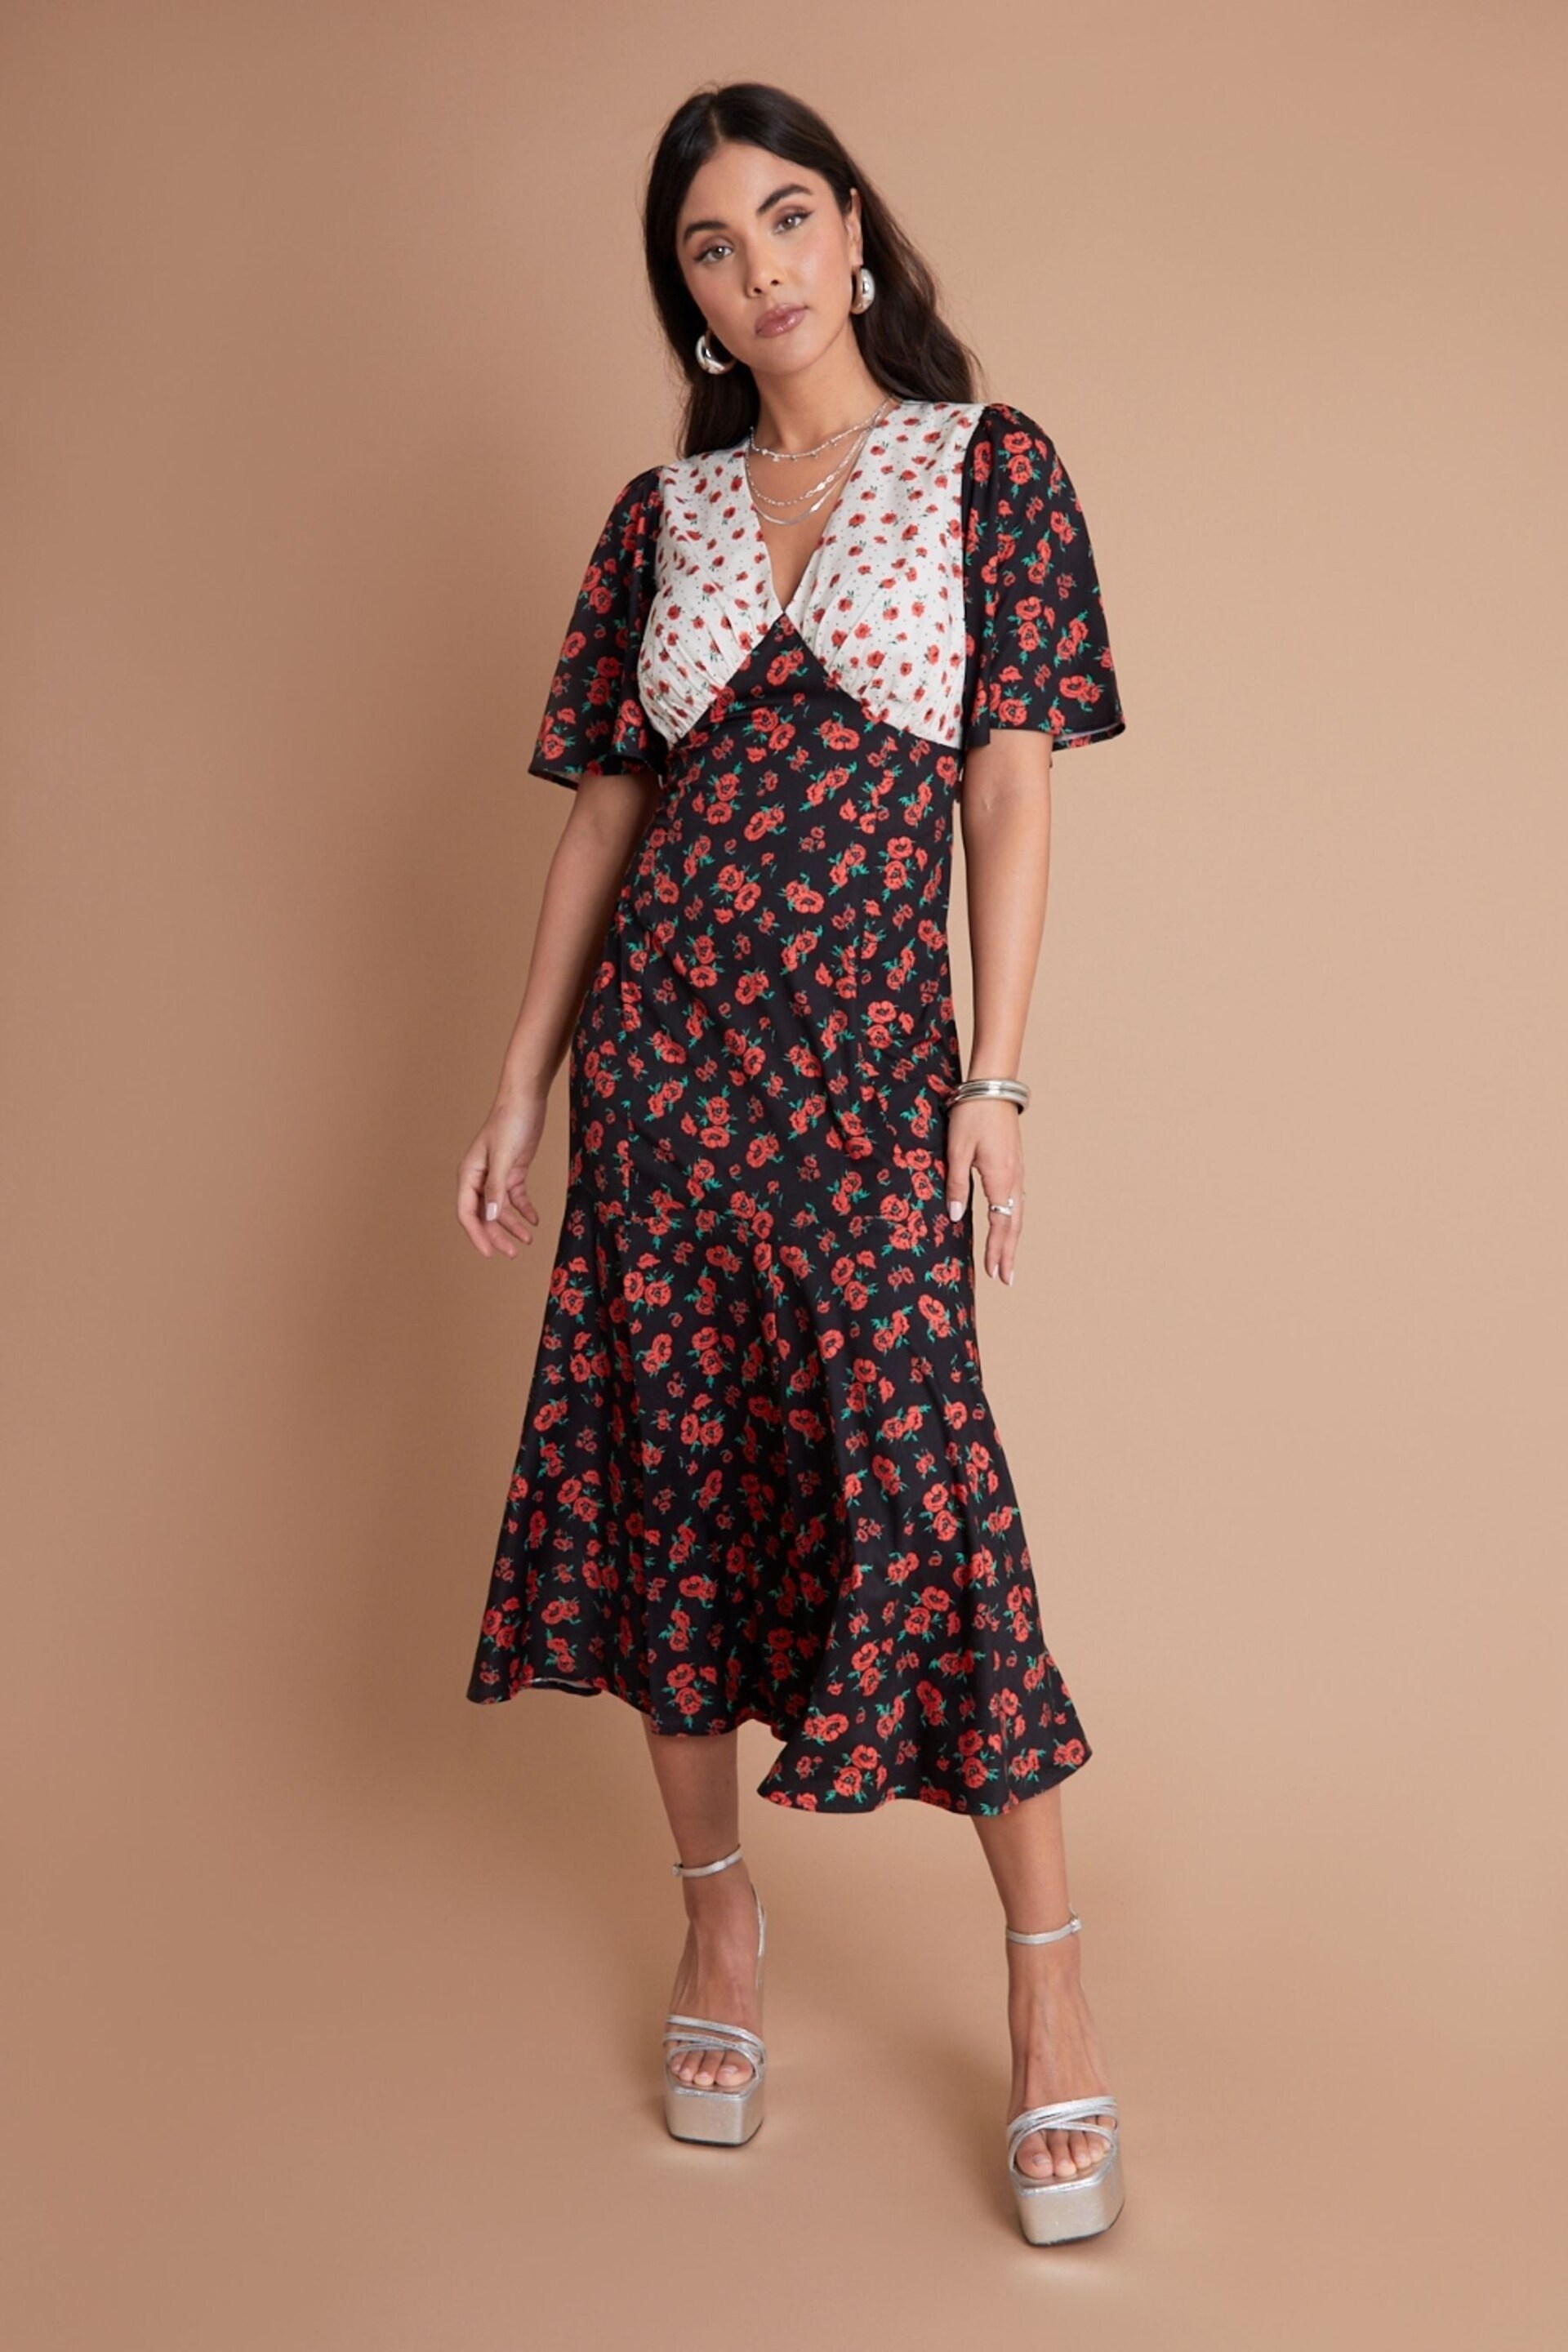 Another Sunday Mix Print Flutter Sleeve Black and Ecru Ditsy Floral Midi White Dress - Image 1 of 3